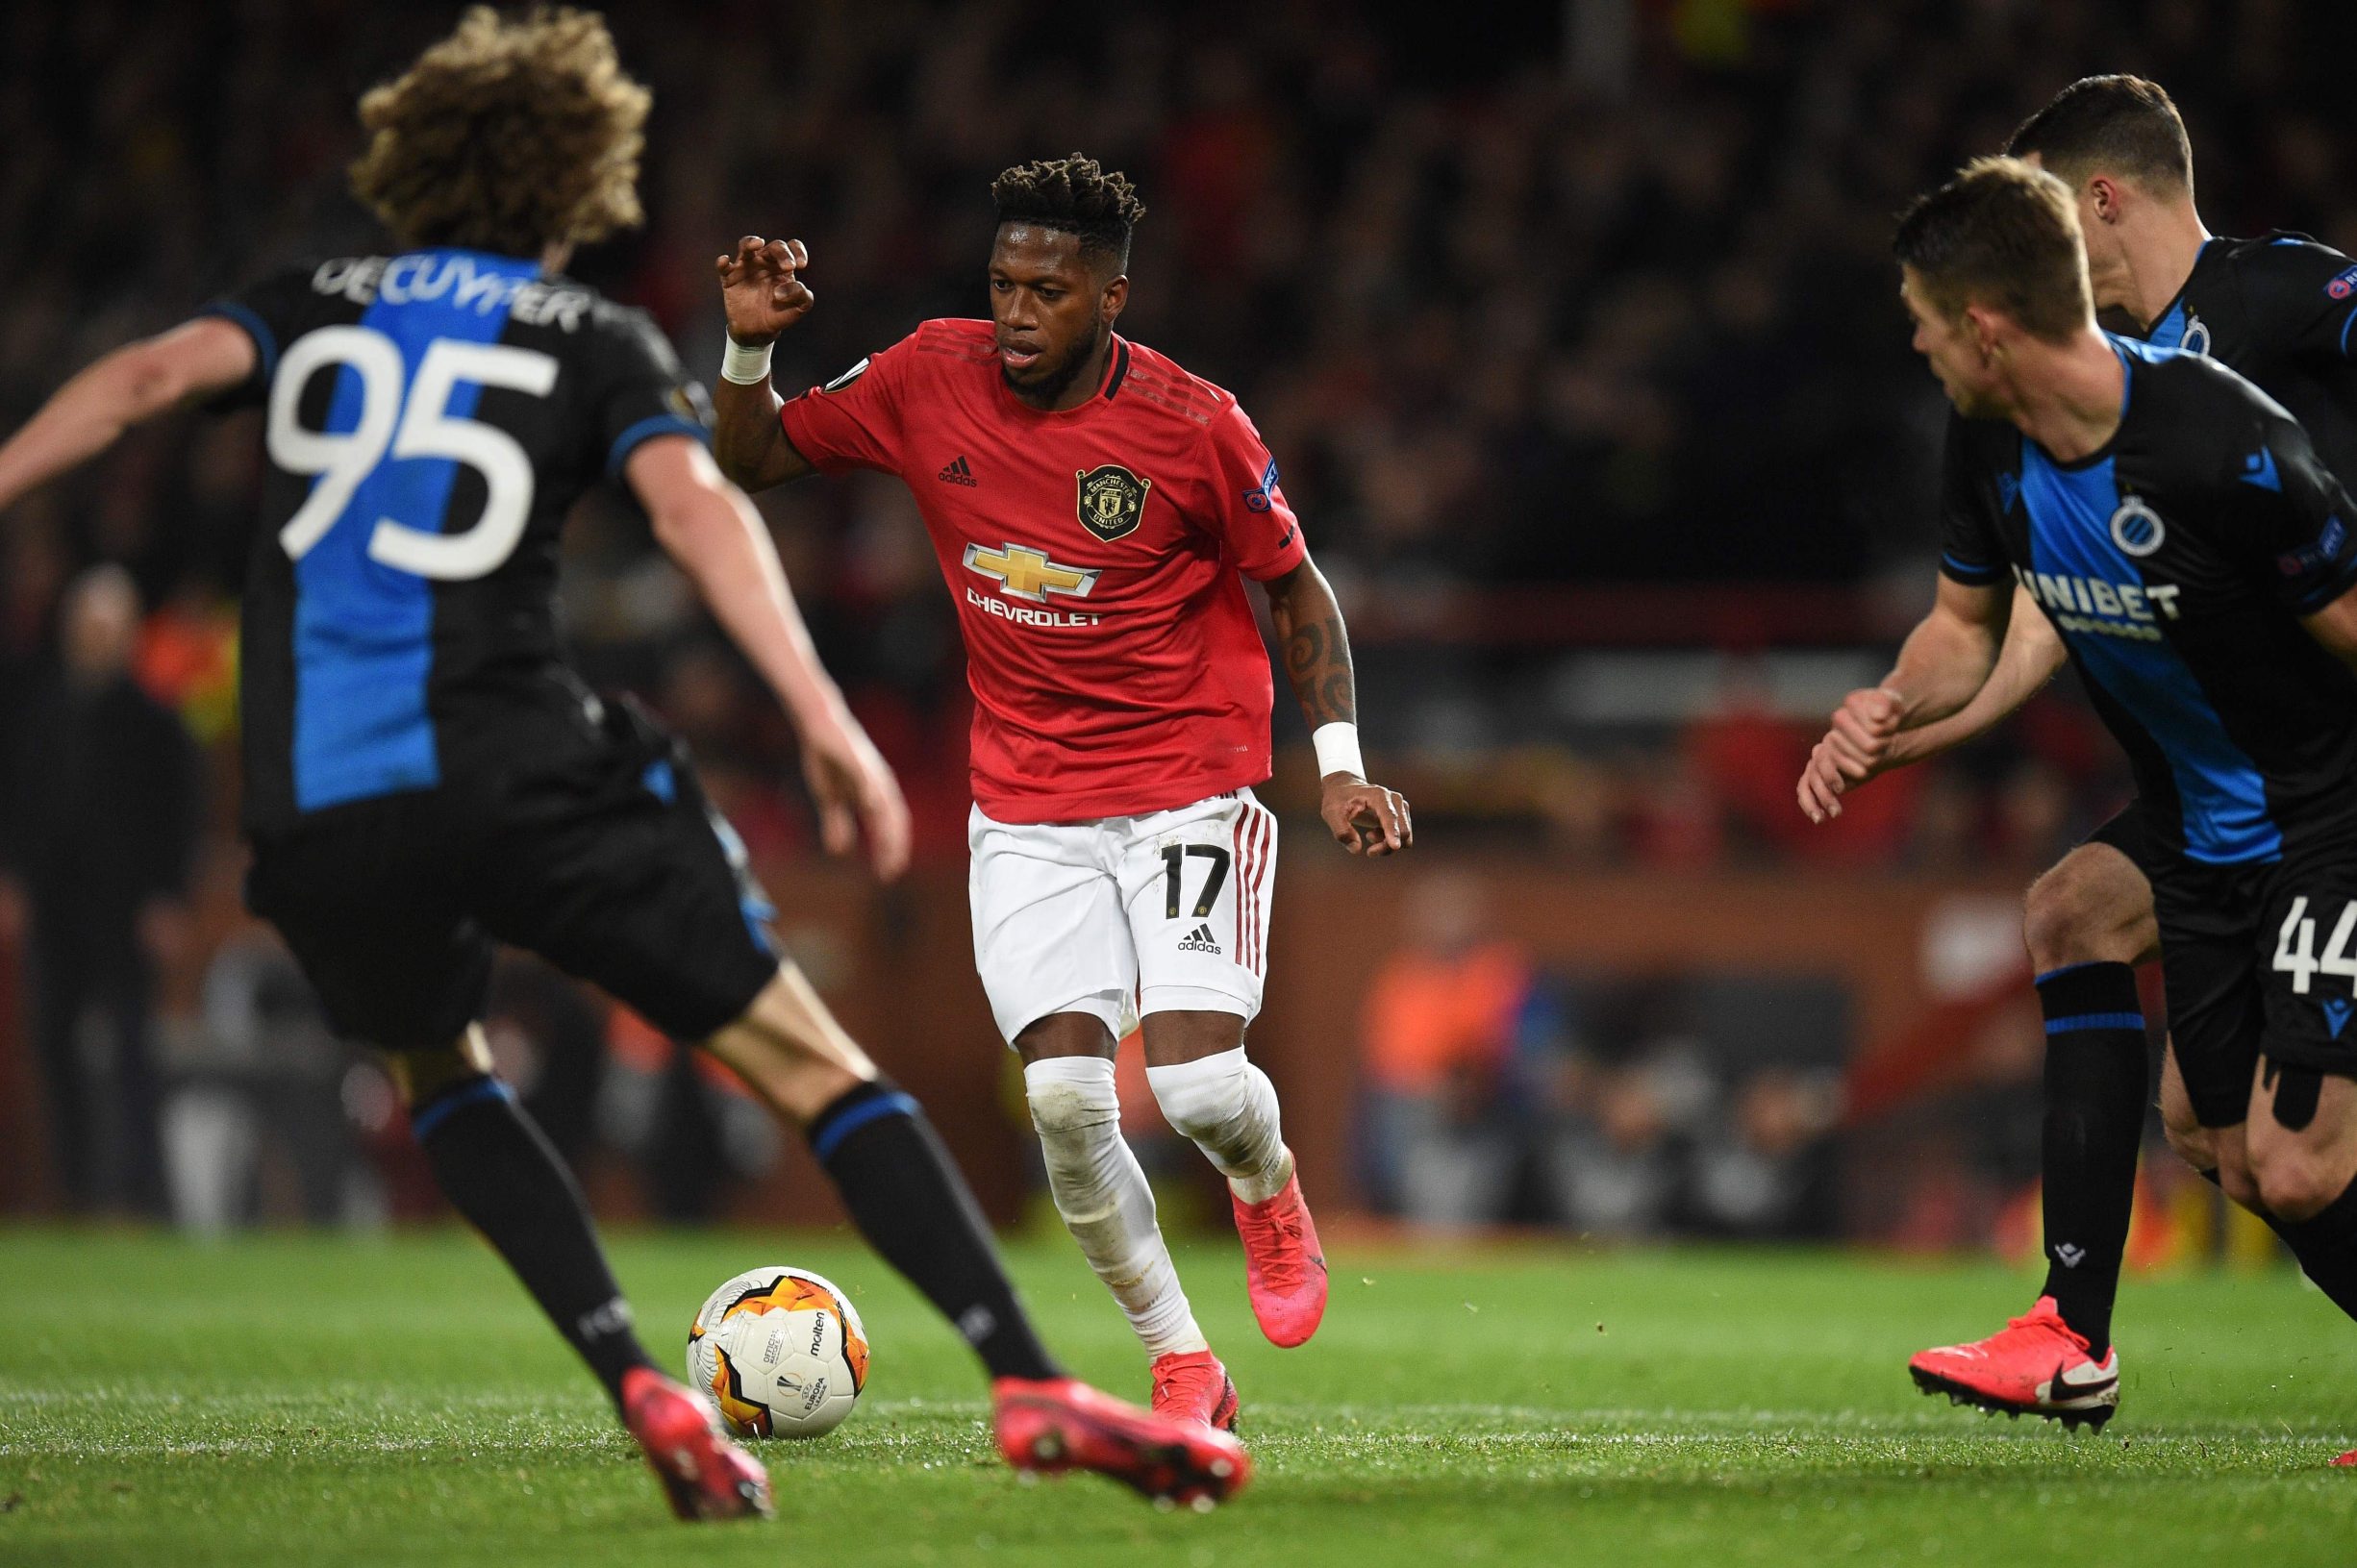 Manchester United's Brazilian midfielder Fred controls the ball during the UEFA Europa League round of 32 second leg football match between Manchester United and Club Brugge at Old Trafford in Manchester, north west England, on February 27, 2020. (Photo by Oli SCARFF / AFP)